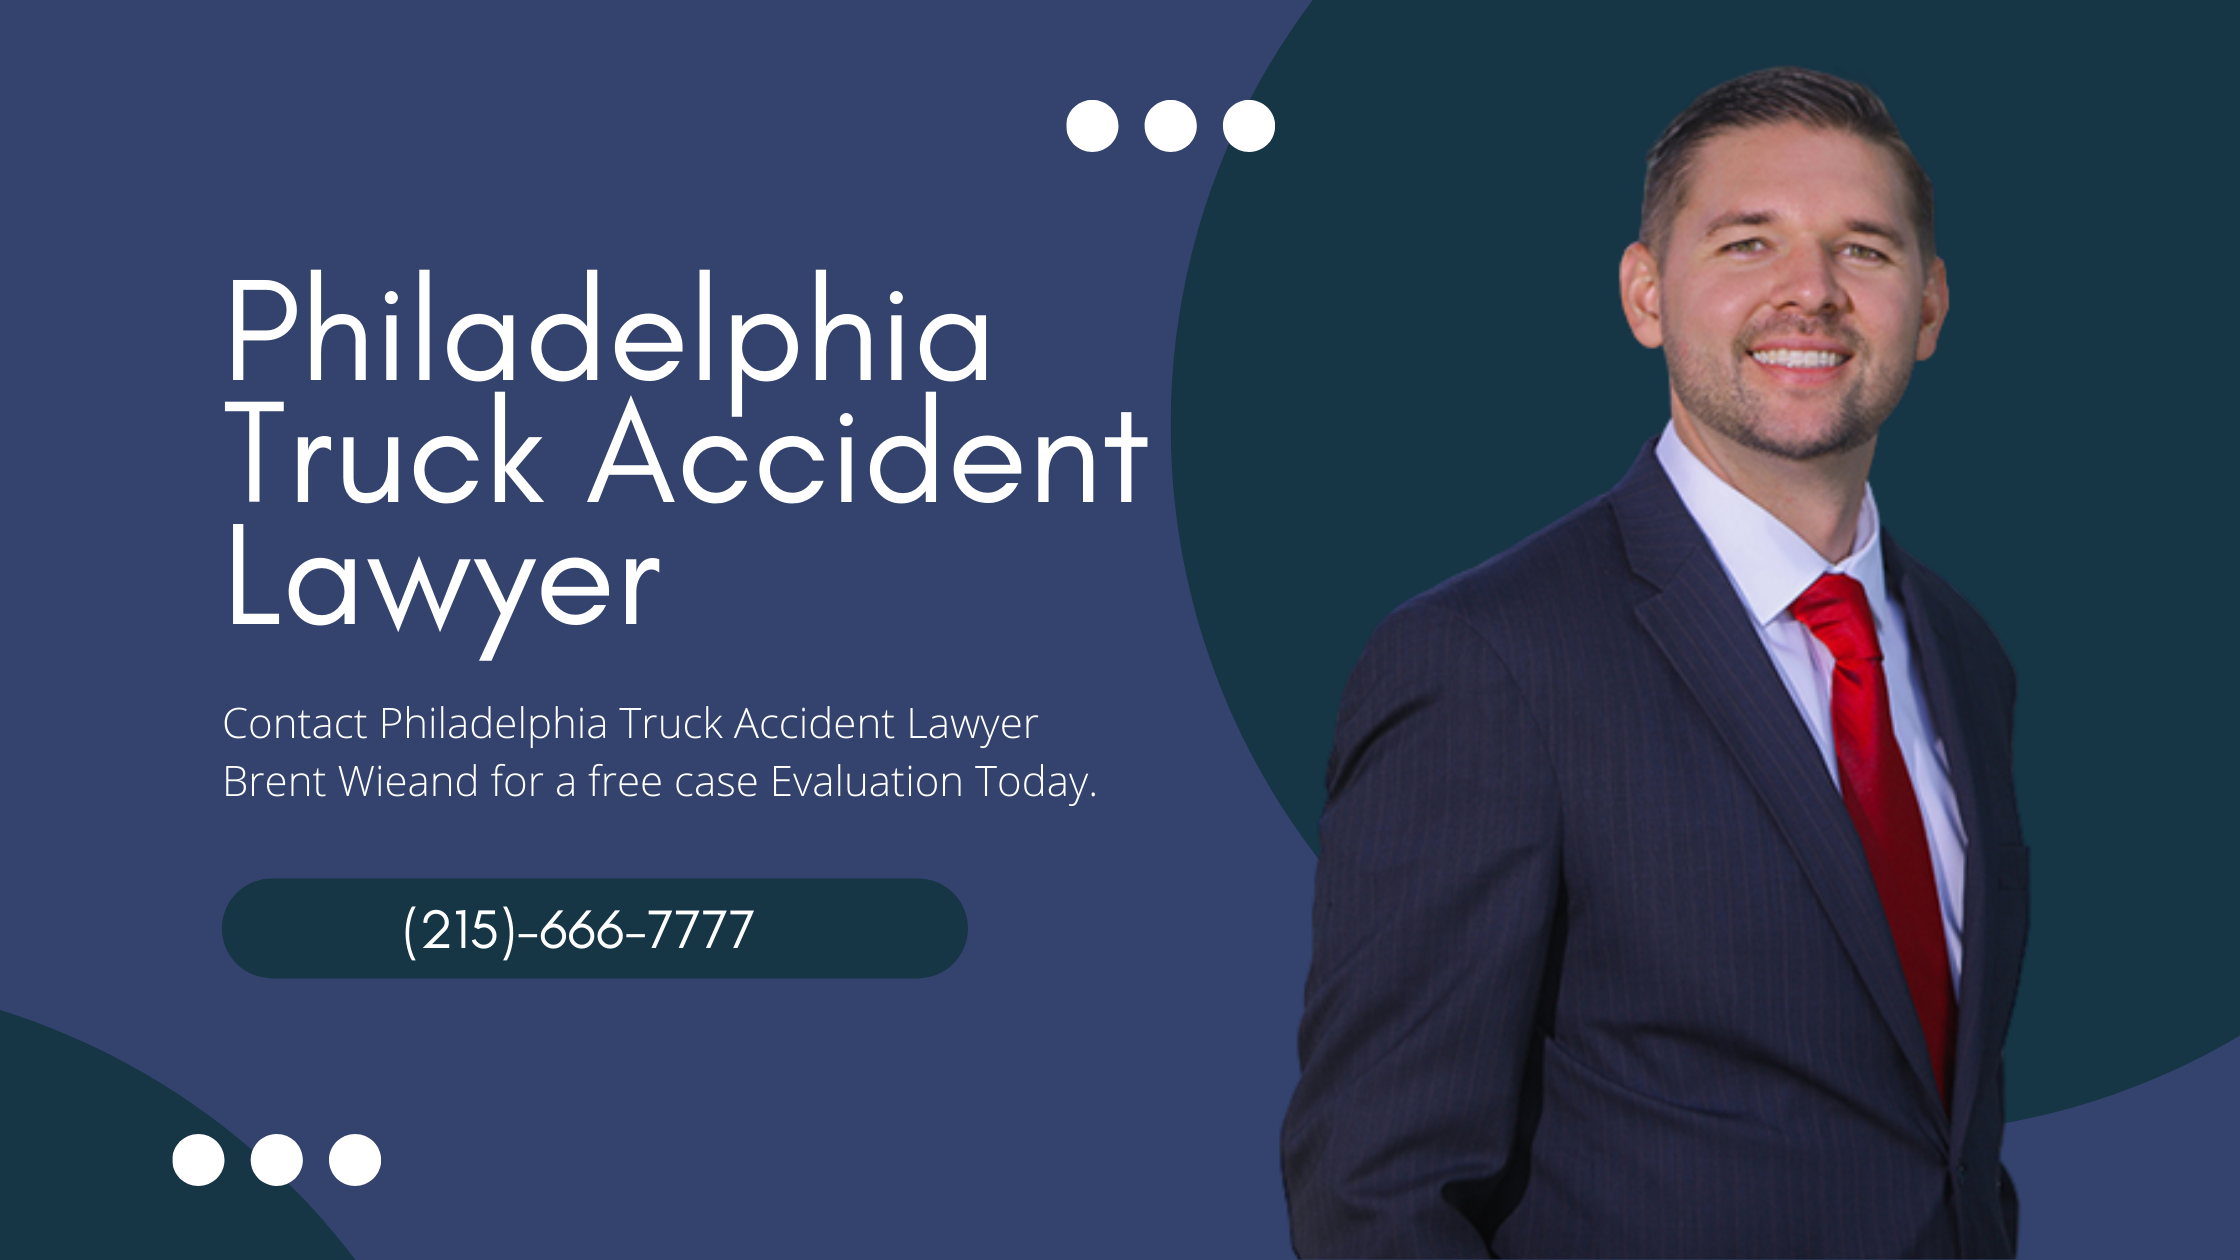 Contact Philadelphia Truck Accident Lawyer Brent Wieand